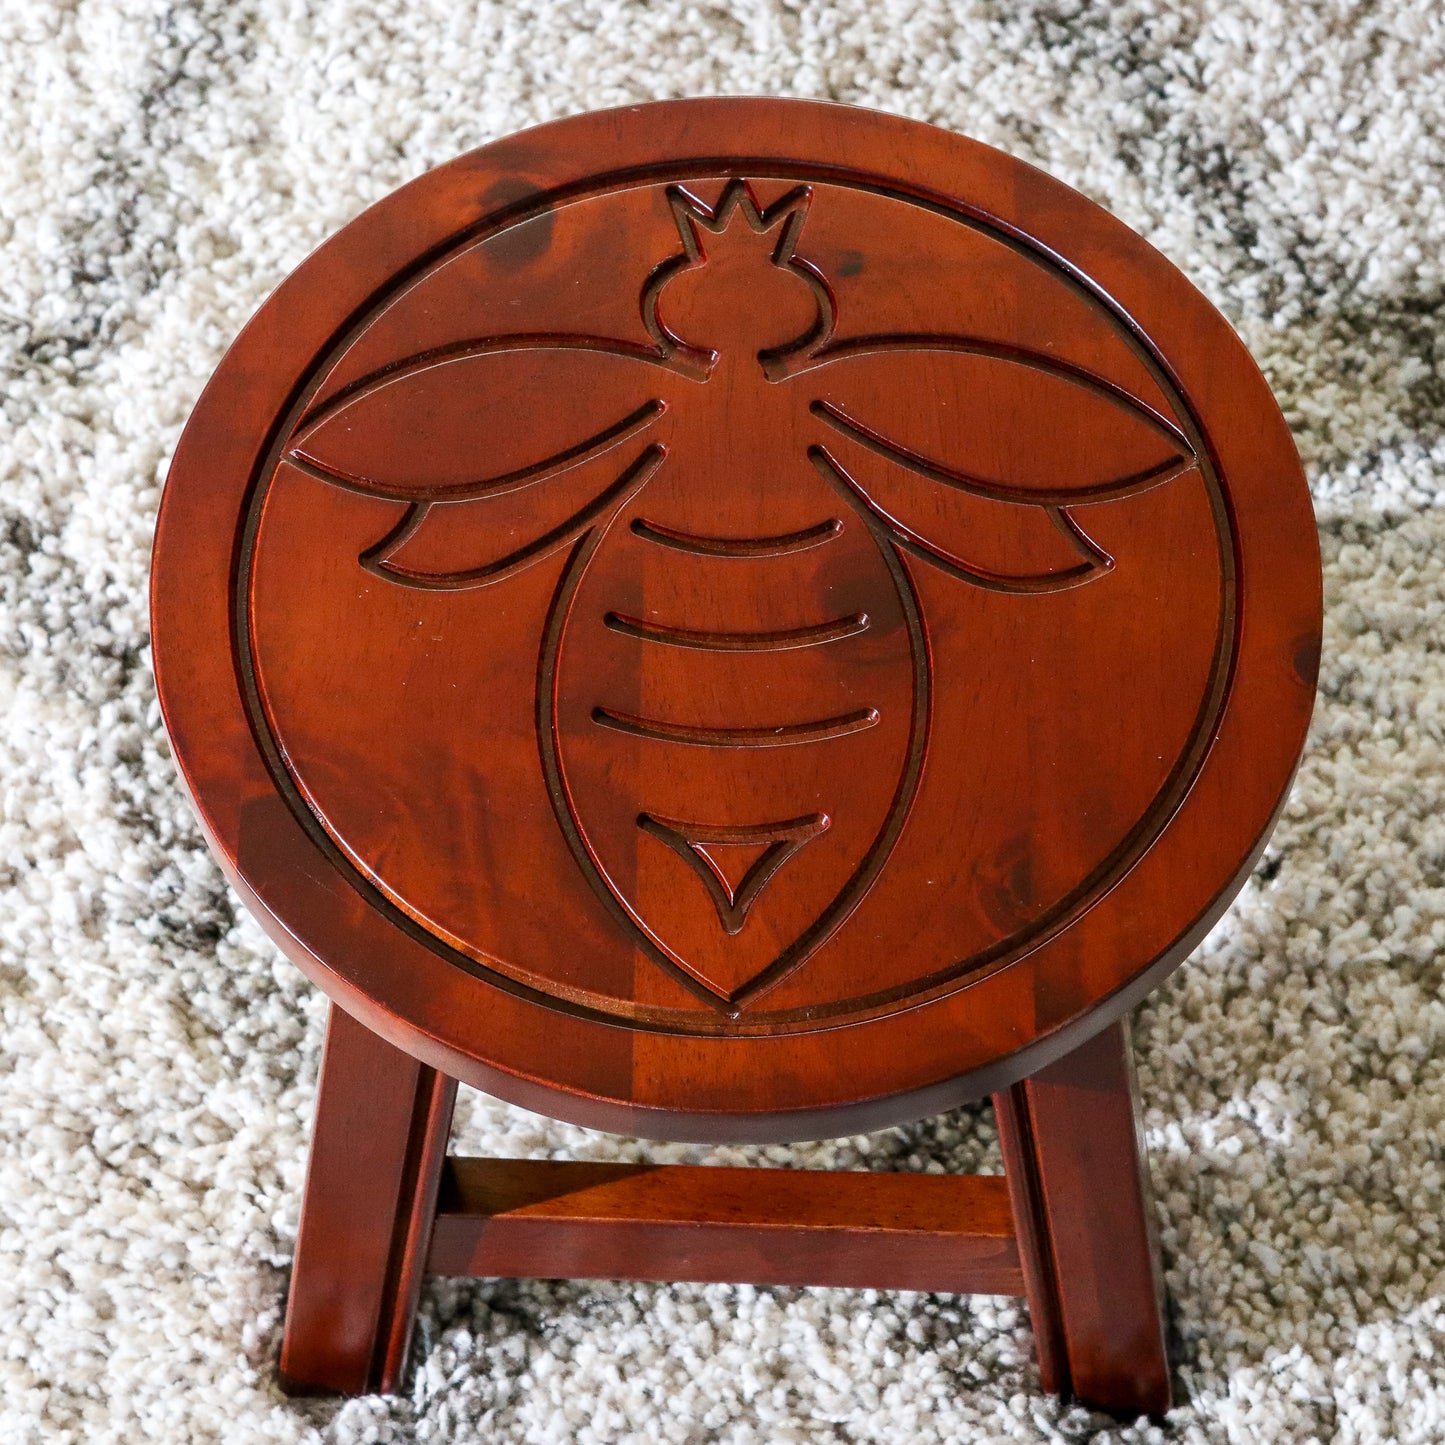 Carved Wooden Step Stool, Queen Bee, Cherry